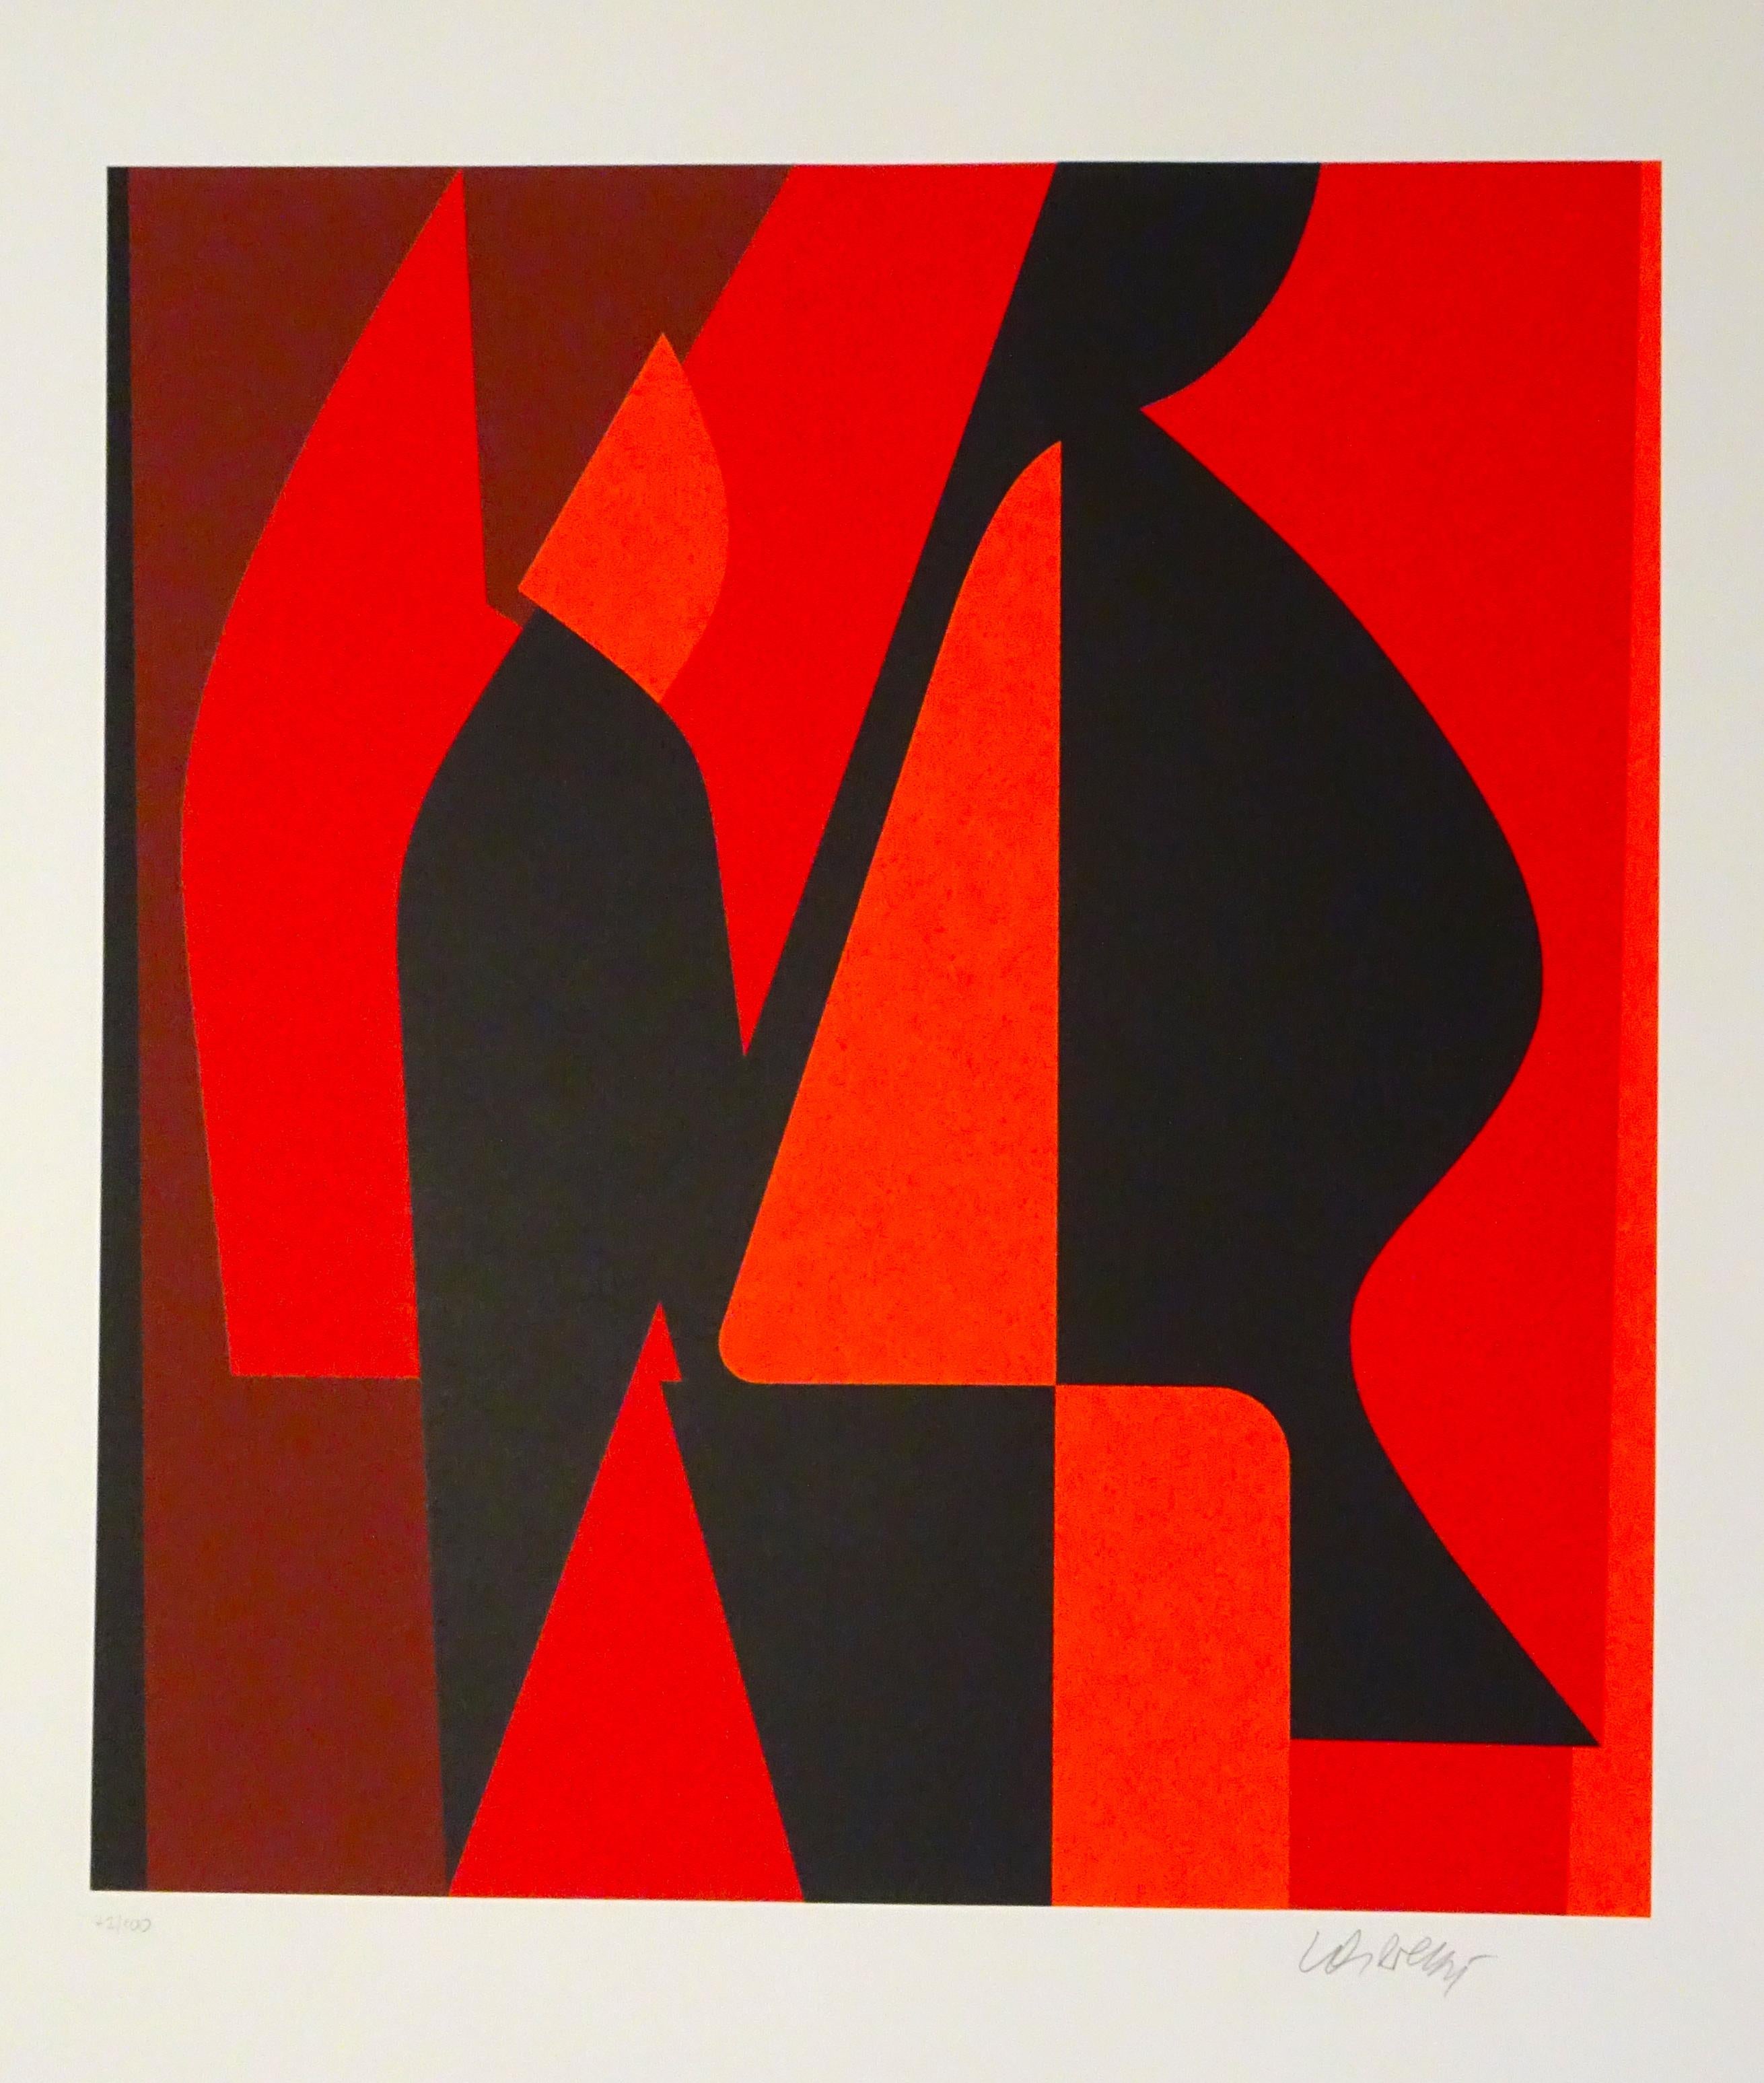 Mixed Red Composition is a very nice serigraph with a red, orange, brown, and black abstract composition realized by Victor Vasarely.
The plate is from the portfolio Les Années Cinquante edited by Pesti Mühely, Budapest, in 1989. Hand-signed by the